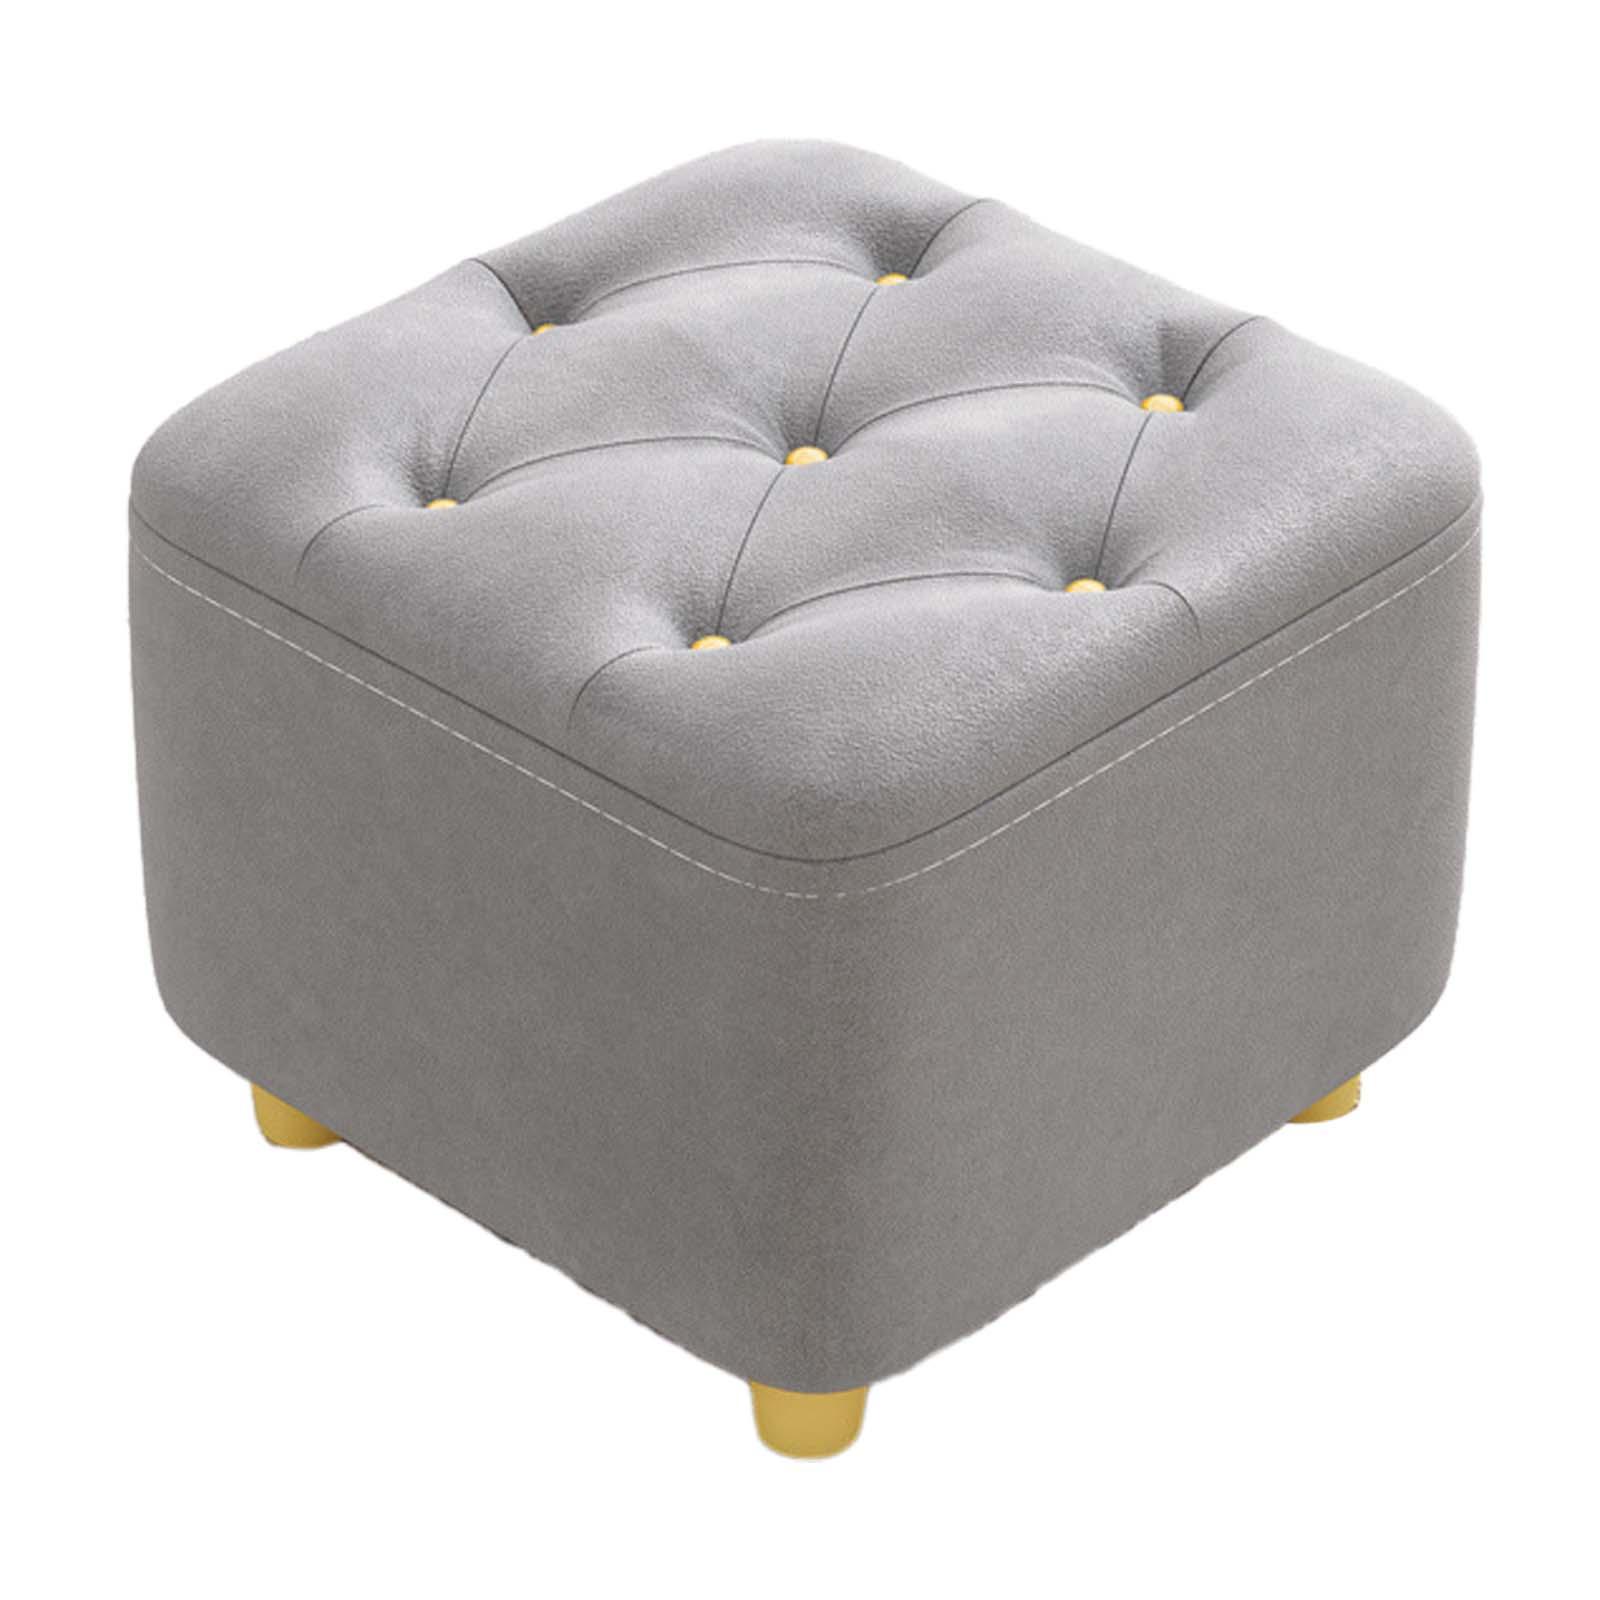 Square Footstool Foot Stool Comfortable Stepstool Creative Ottoman Stool Footrest for Living Room Dressing Room Bedroom Couch gray - image 1 of 8